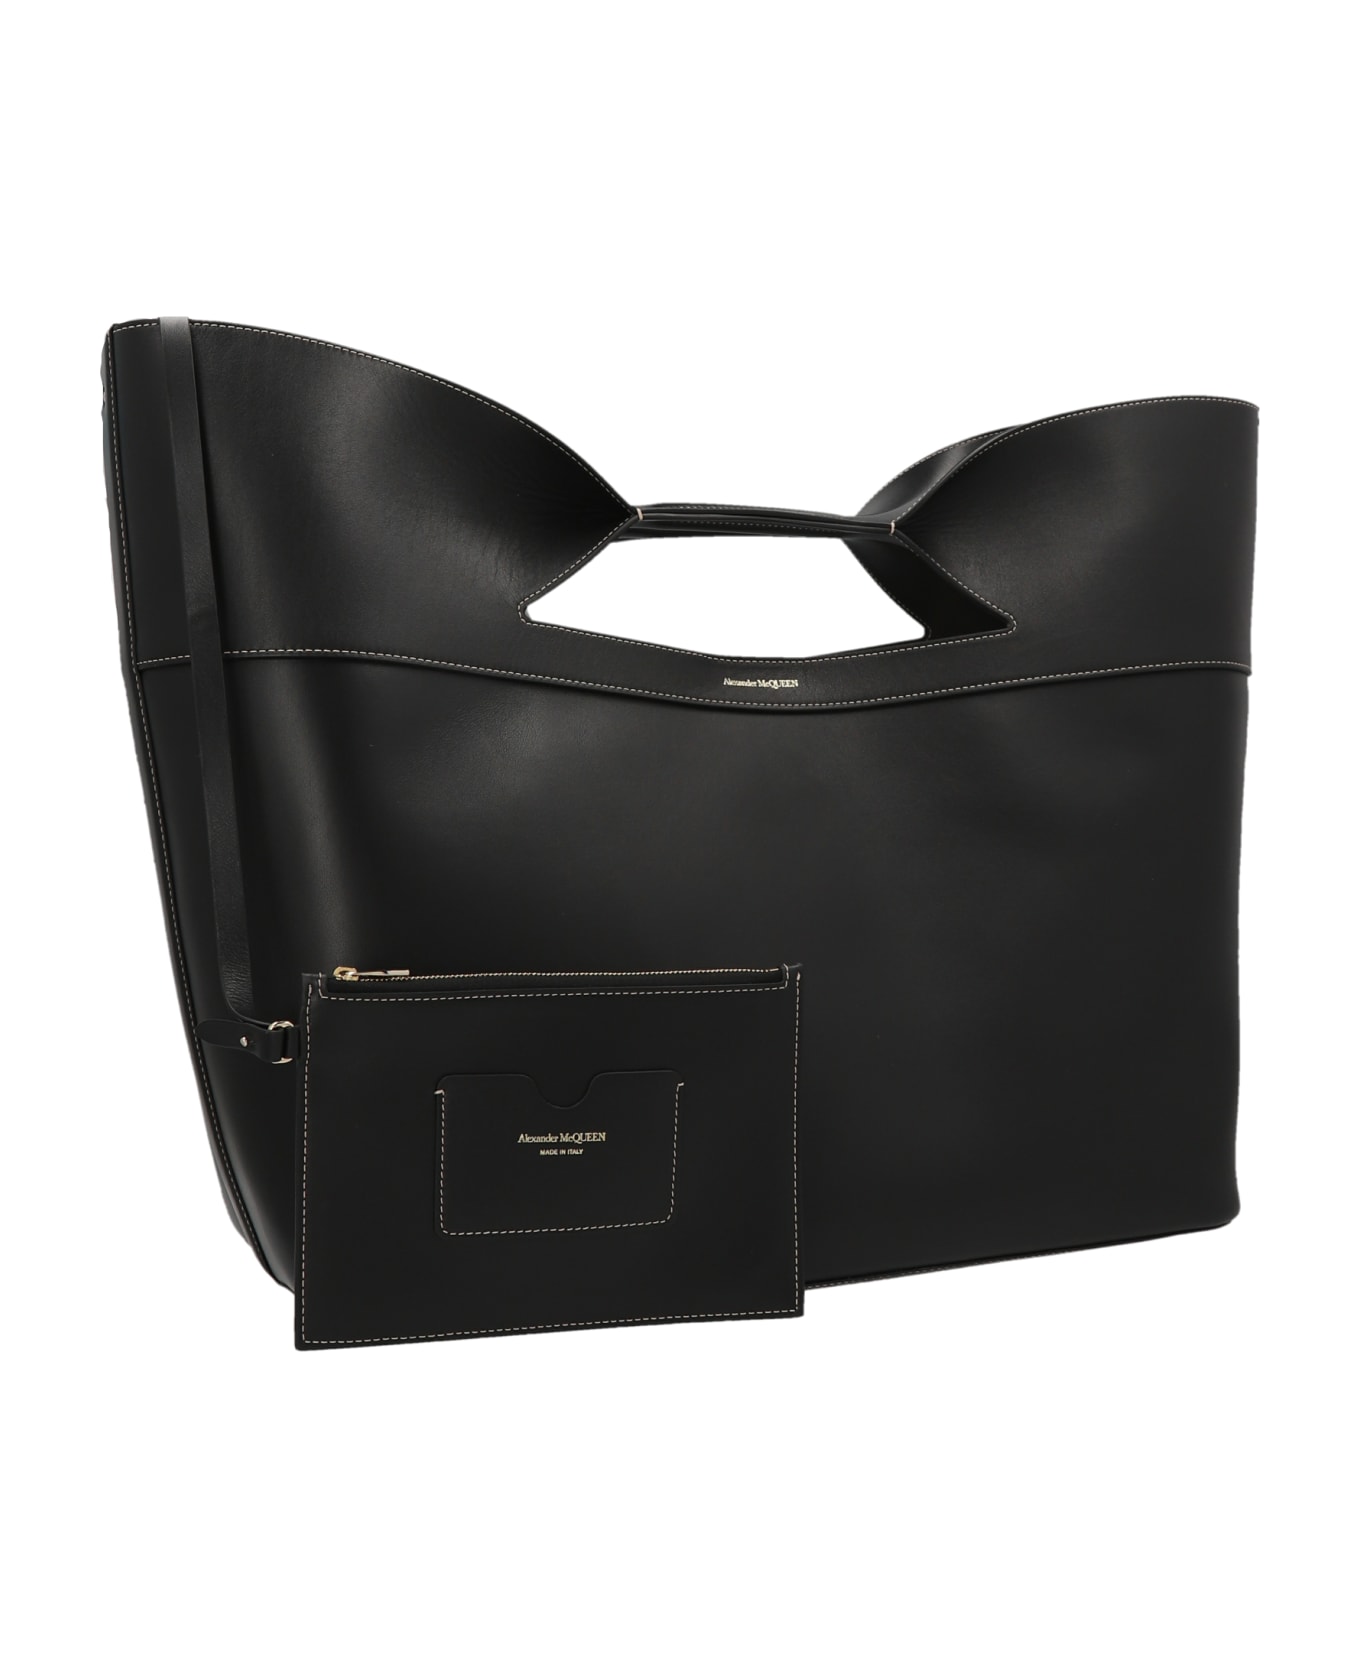 Alexander McQueen The Bow Leather Bag - Black